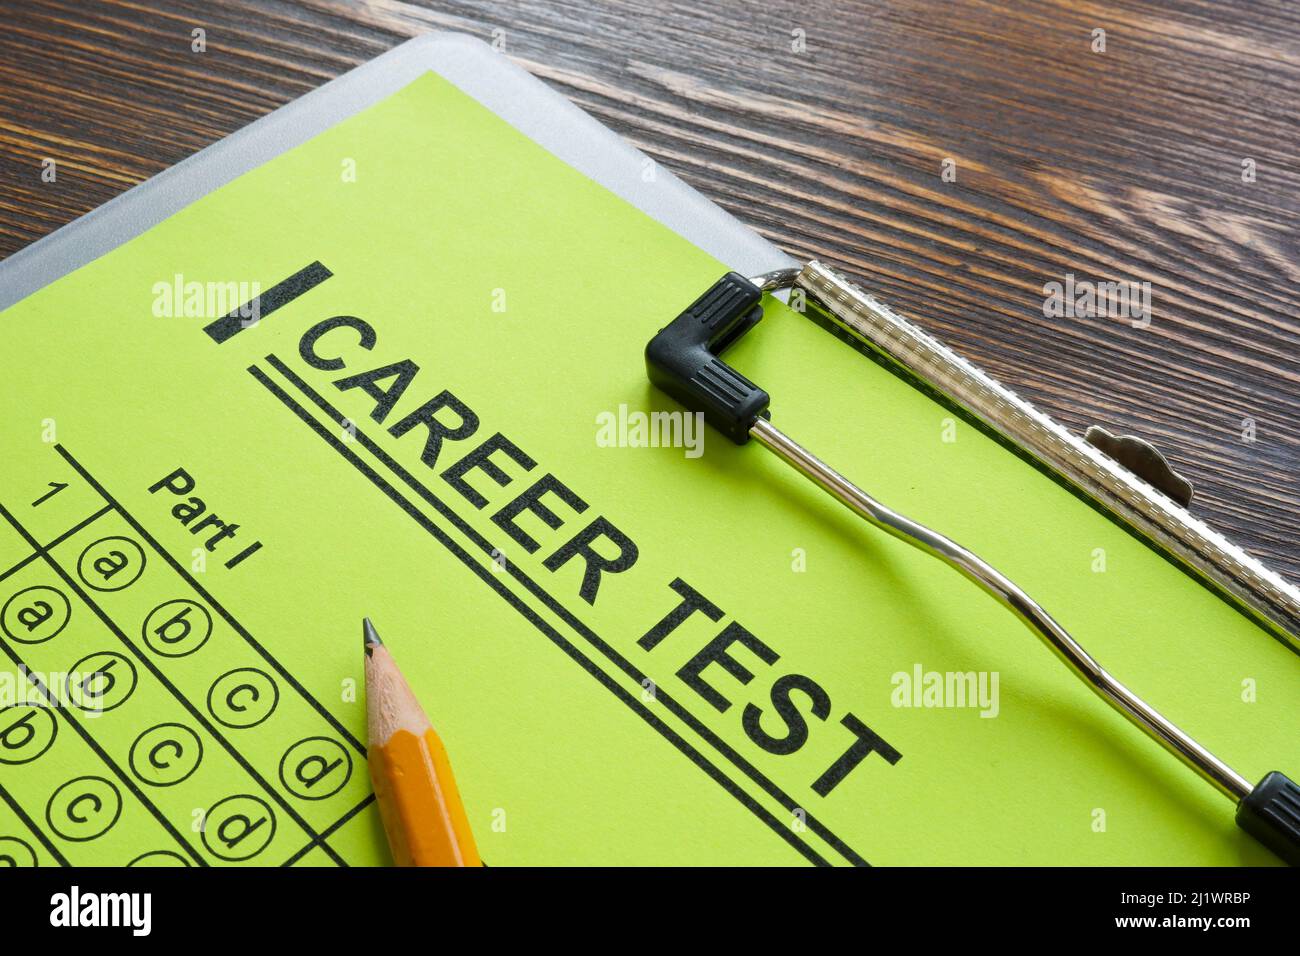 Career test empty form, pensile and clipboard. Stock Photo